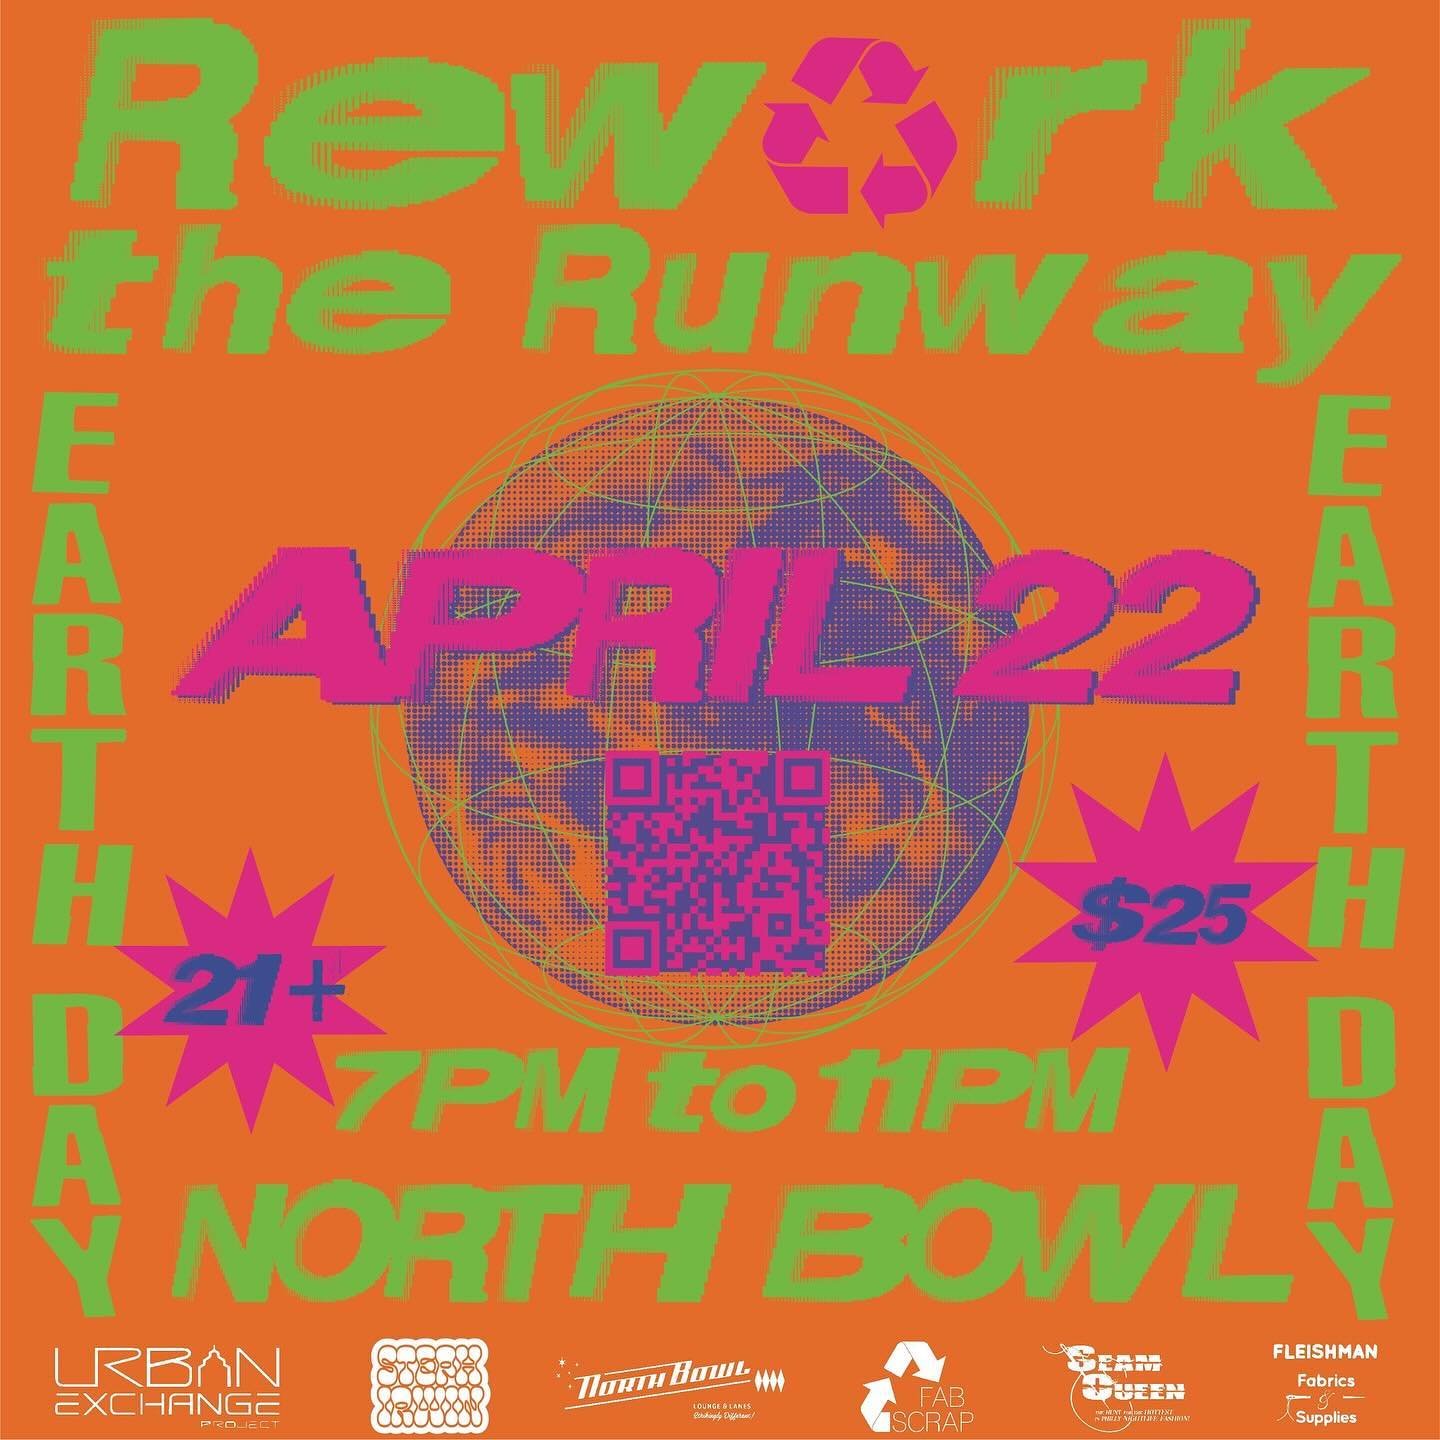 2 WEEKS FROM TODAY ON EARTH DAY MONDAY 4/22 🌎WE WILL BE POSTED UP OUTSIDE @northbowlphilly w/ 13 LOCAL VINTAGE CLOTHING VENDORS FROM 6-9pm 🧥 DURING @reworktherunway ♻️ THE MARKET IS FREE TO ATTEND, DOG FRIENDLY, &amp; 21+ AS ITS IN THE BEER GARDEN 